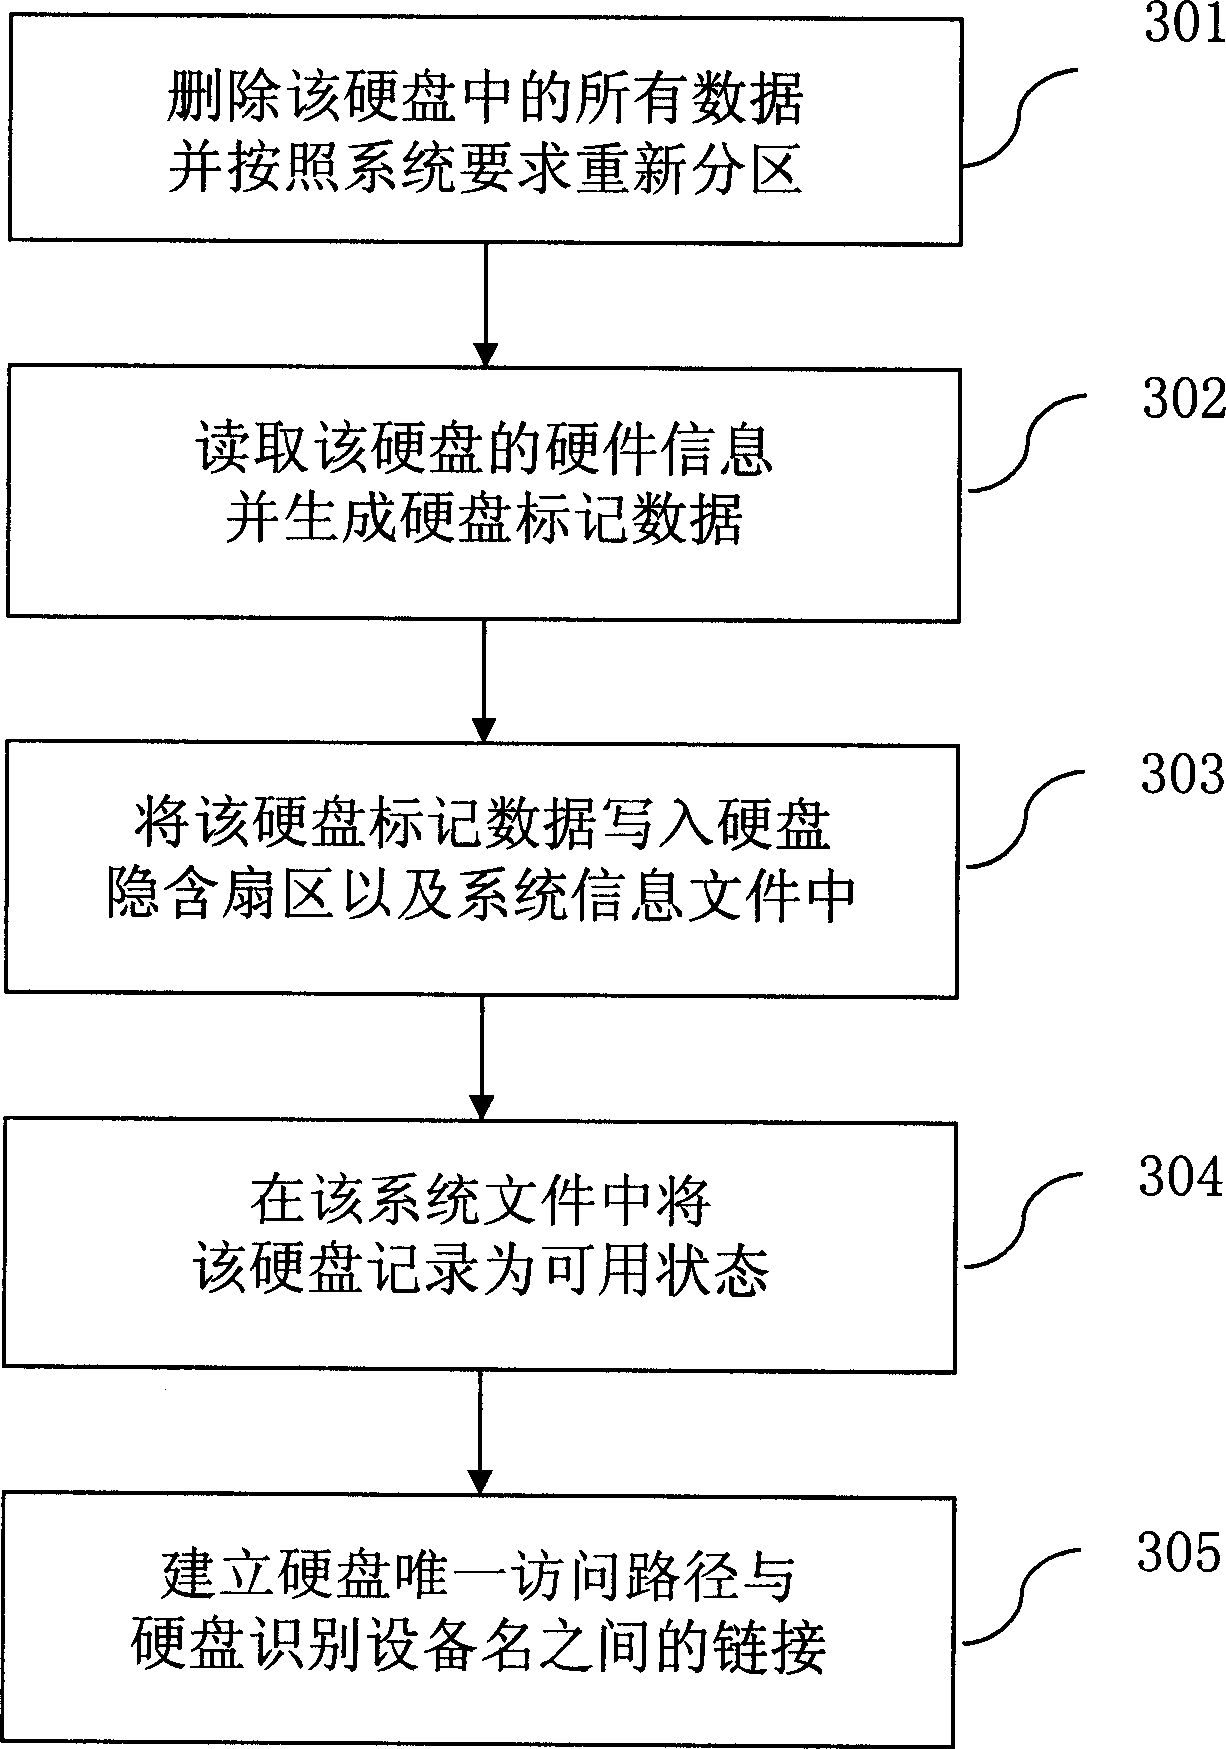 Hard disk replacement control and management method for network storage system